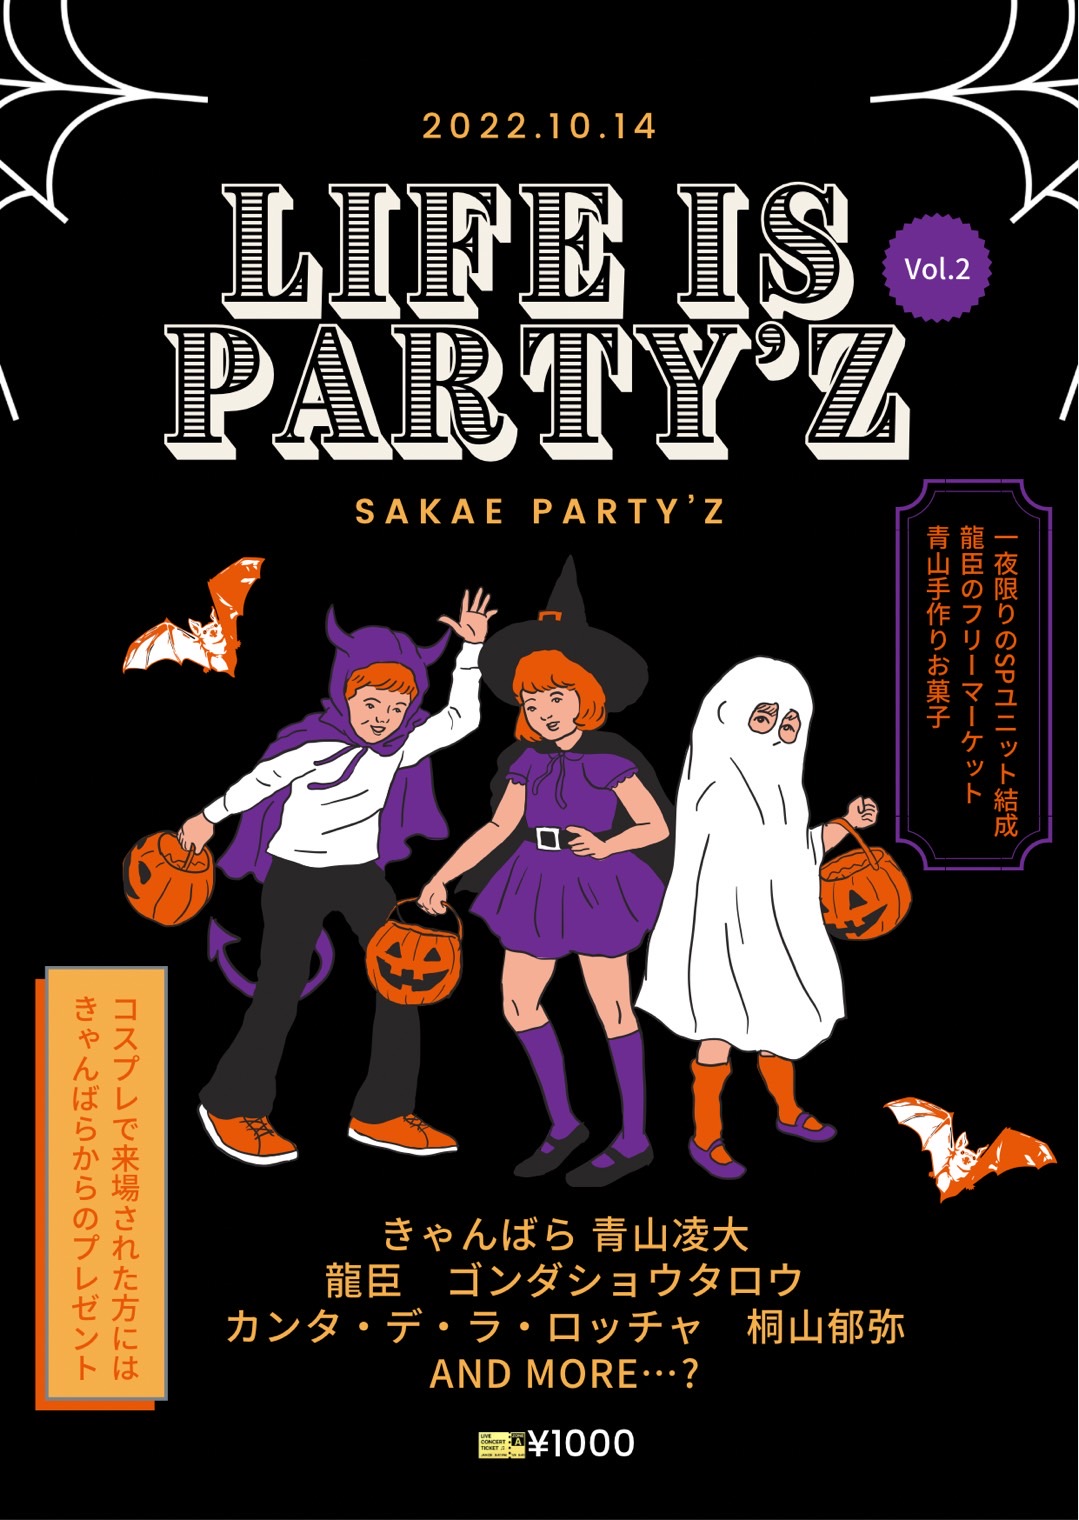 LIFE IS PARTY'Z vol.2